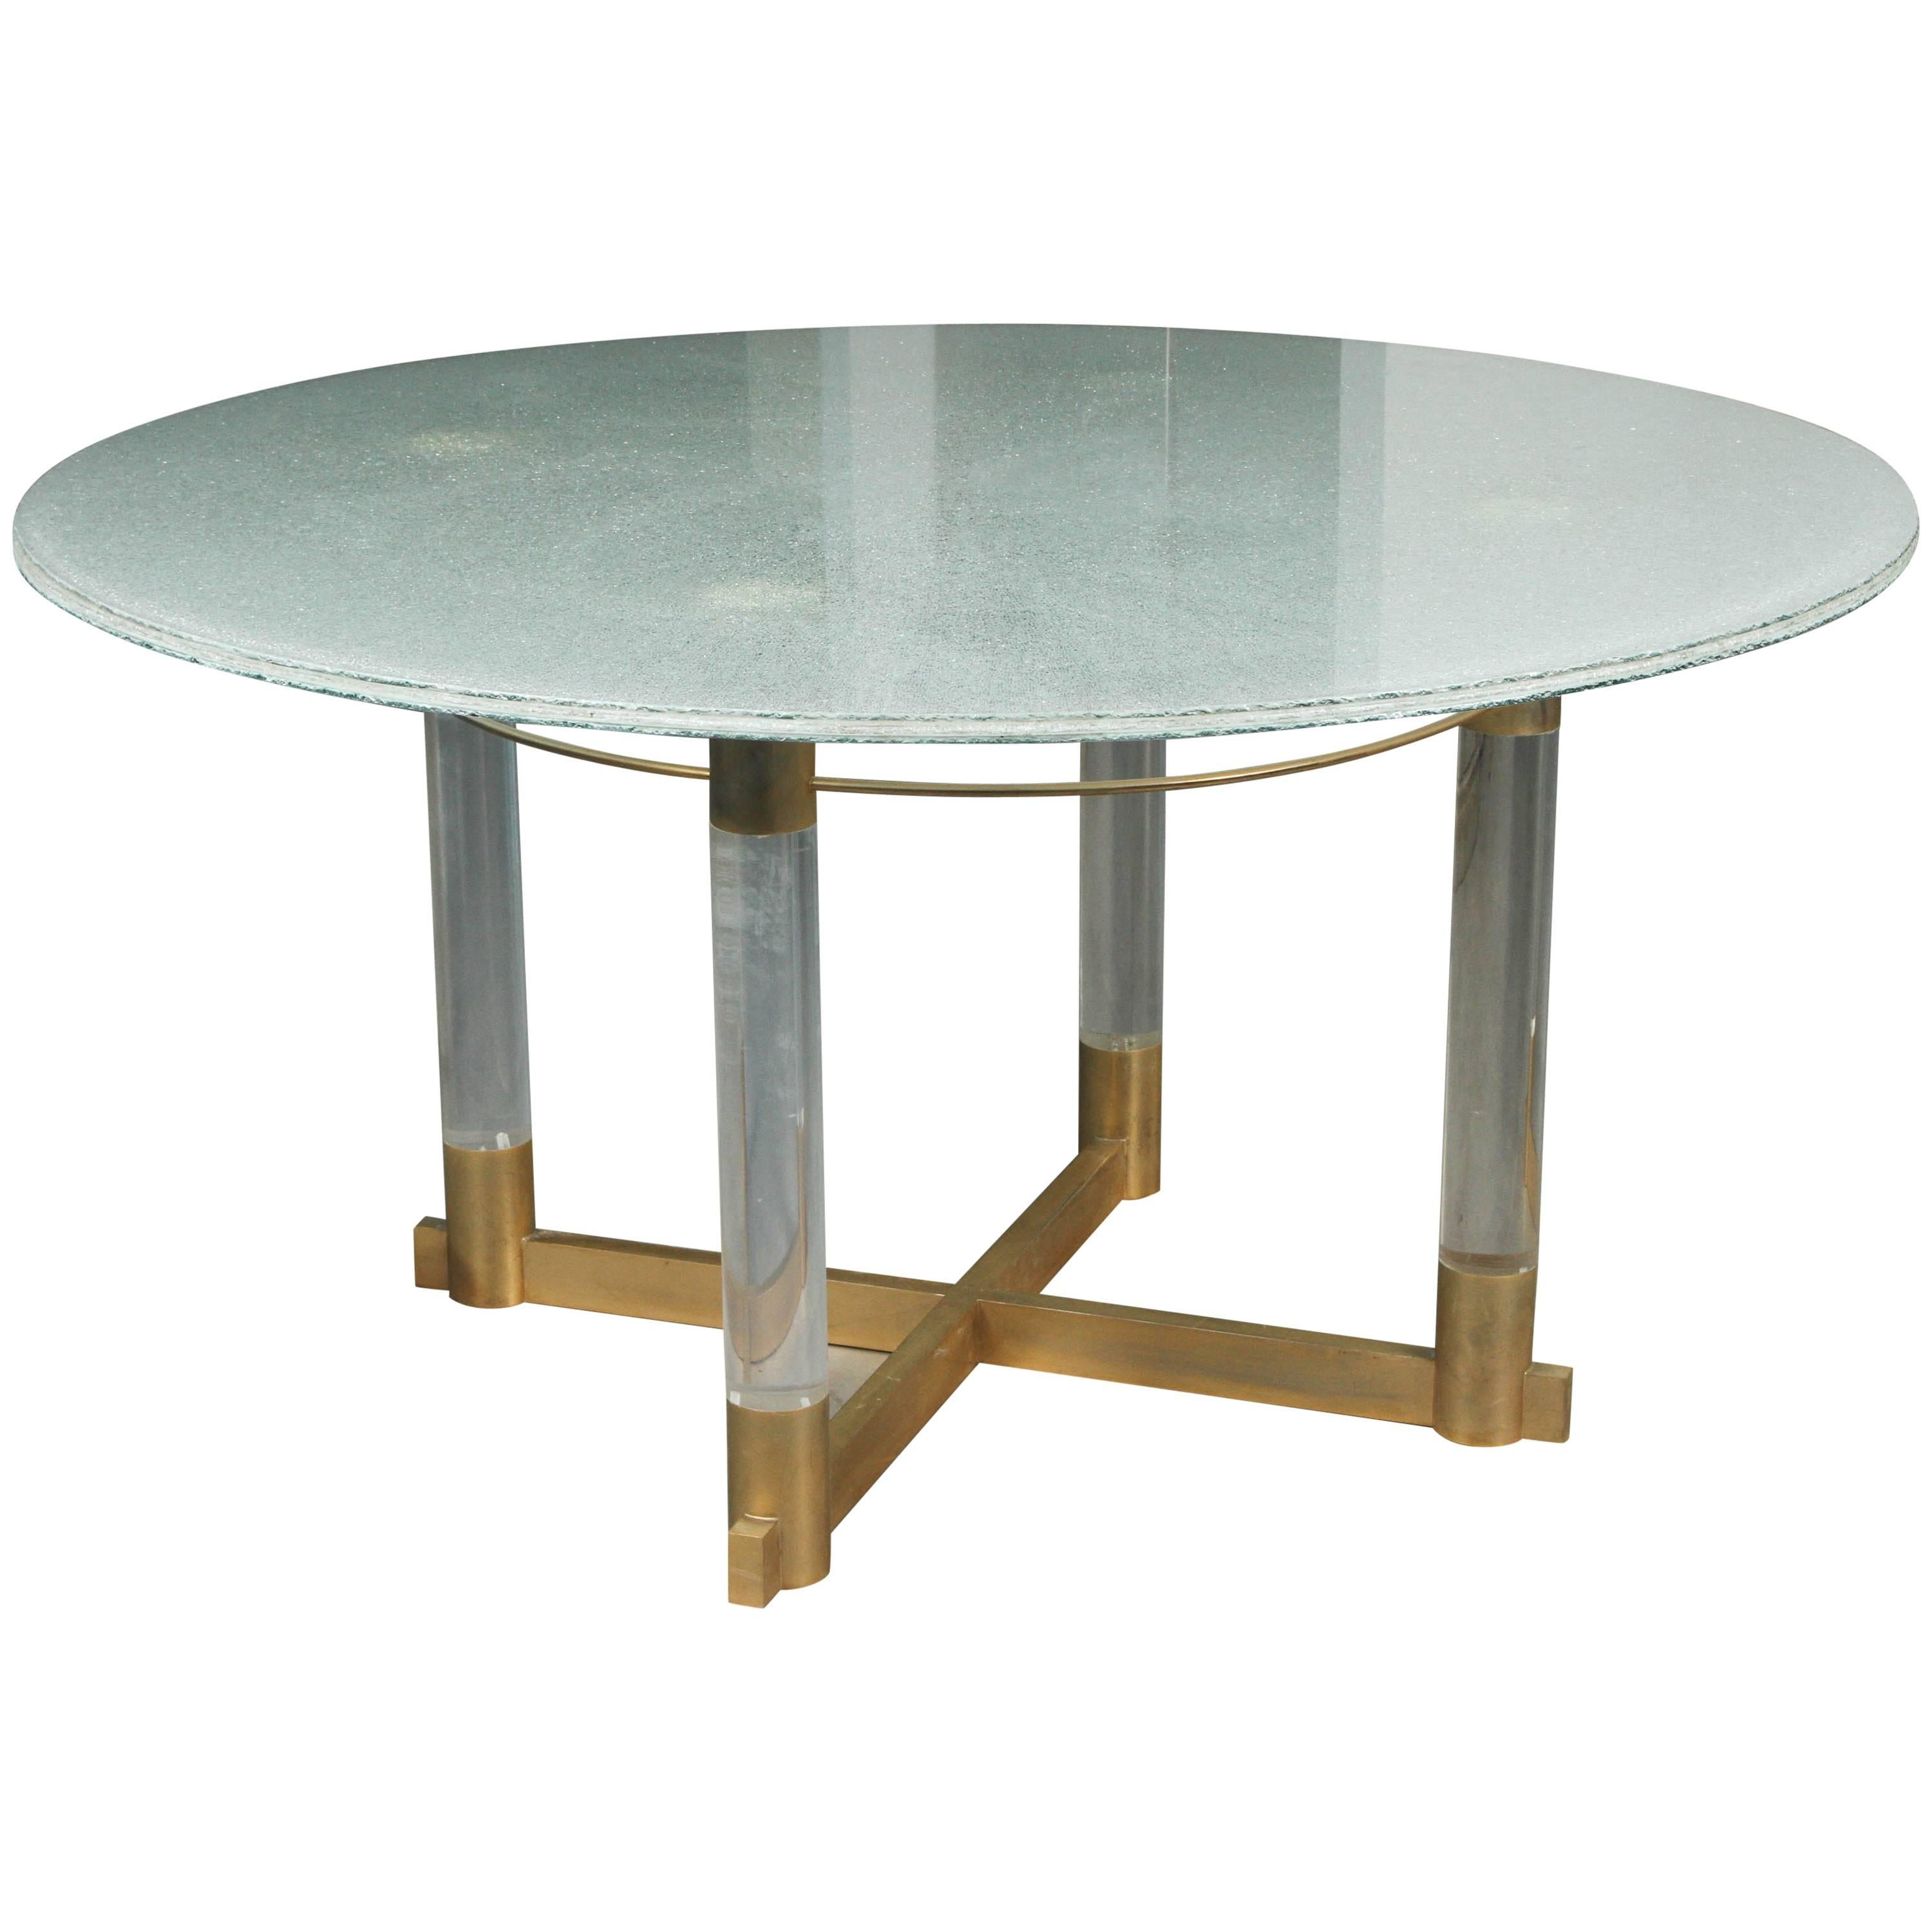 Crackled Glass Dining Table with a Base of Lucite and Brass